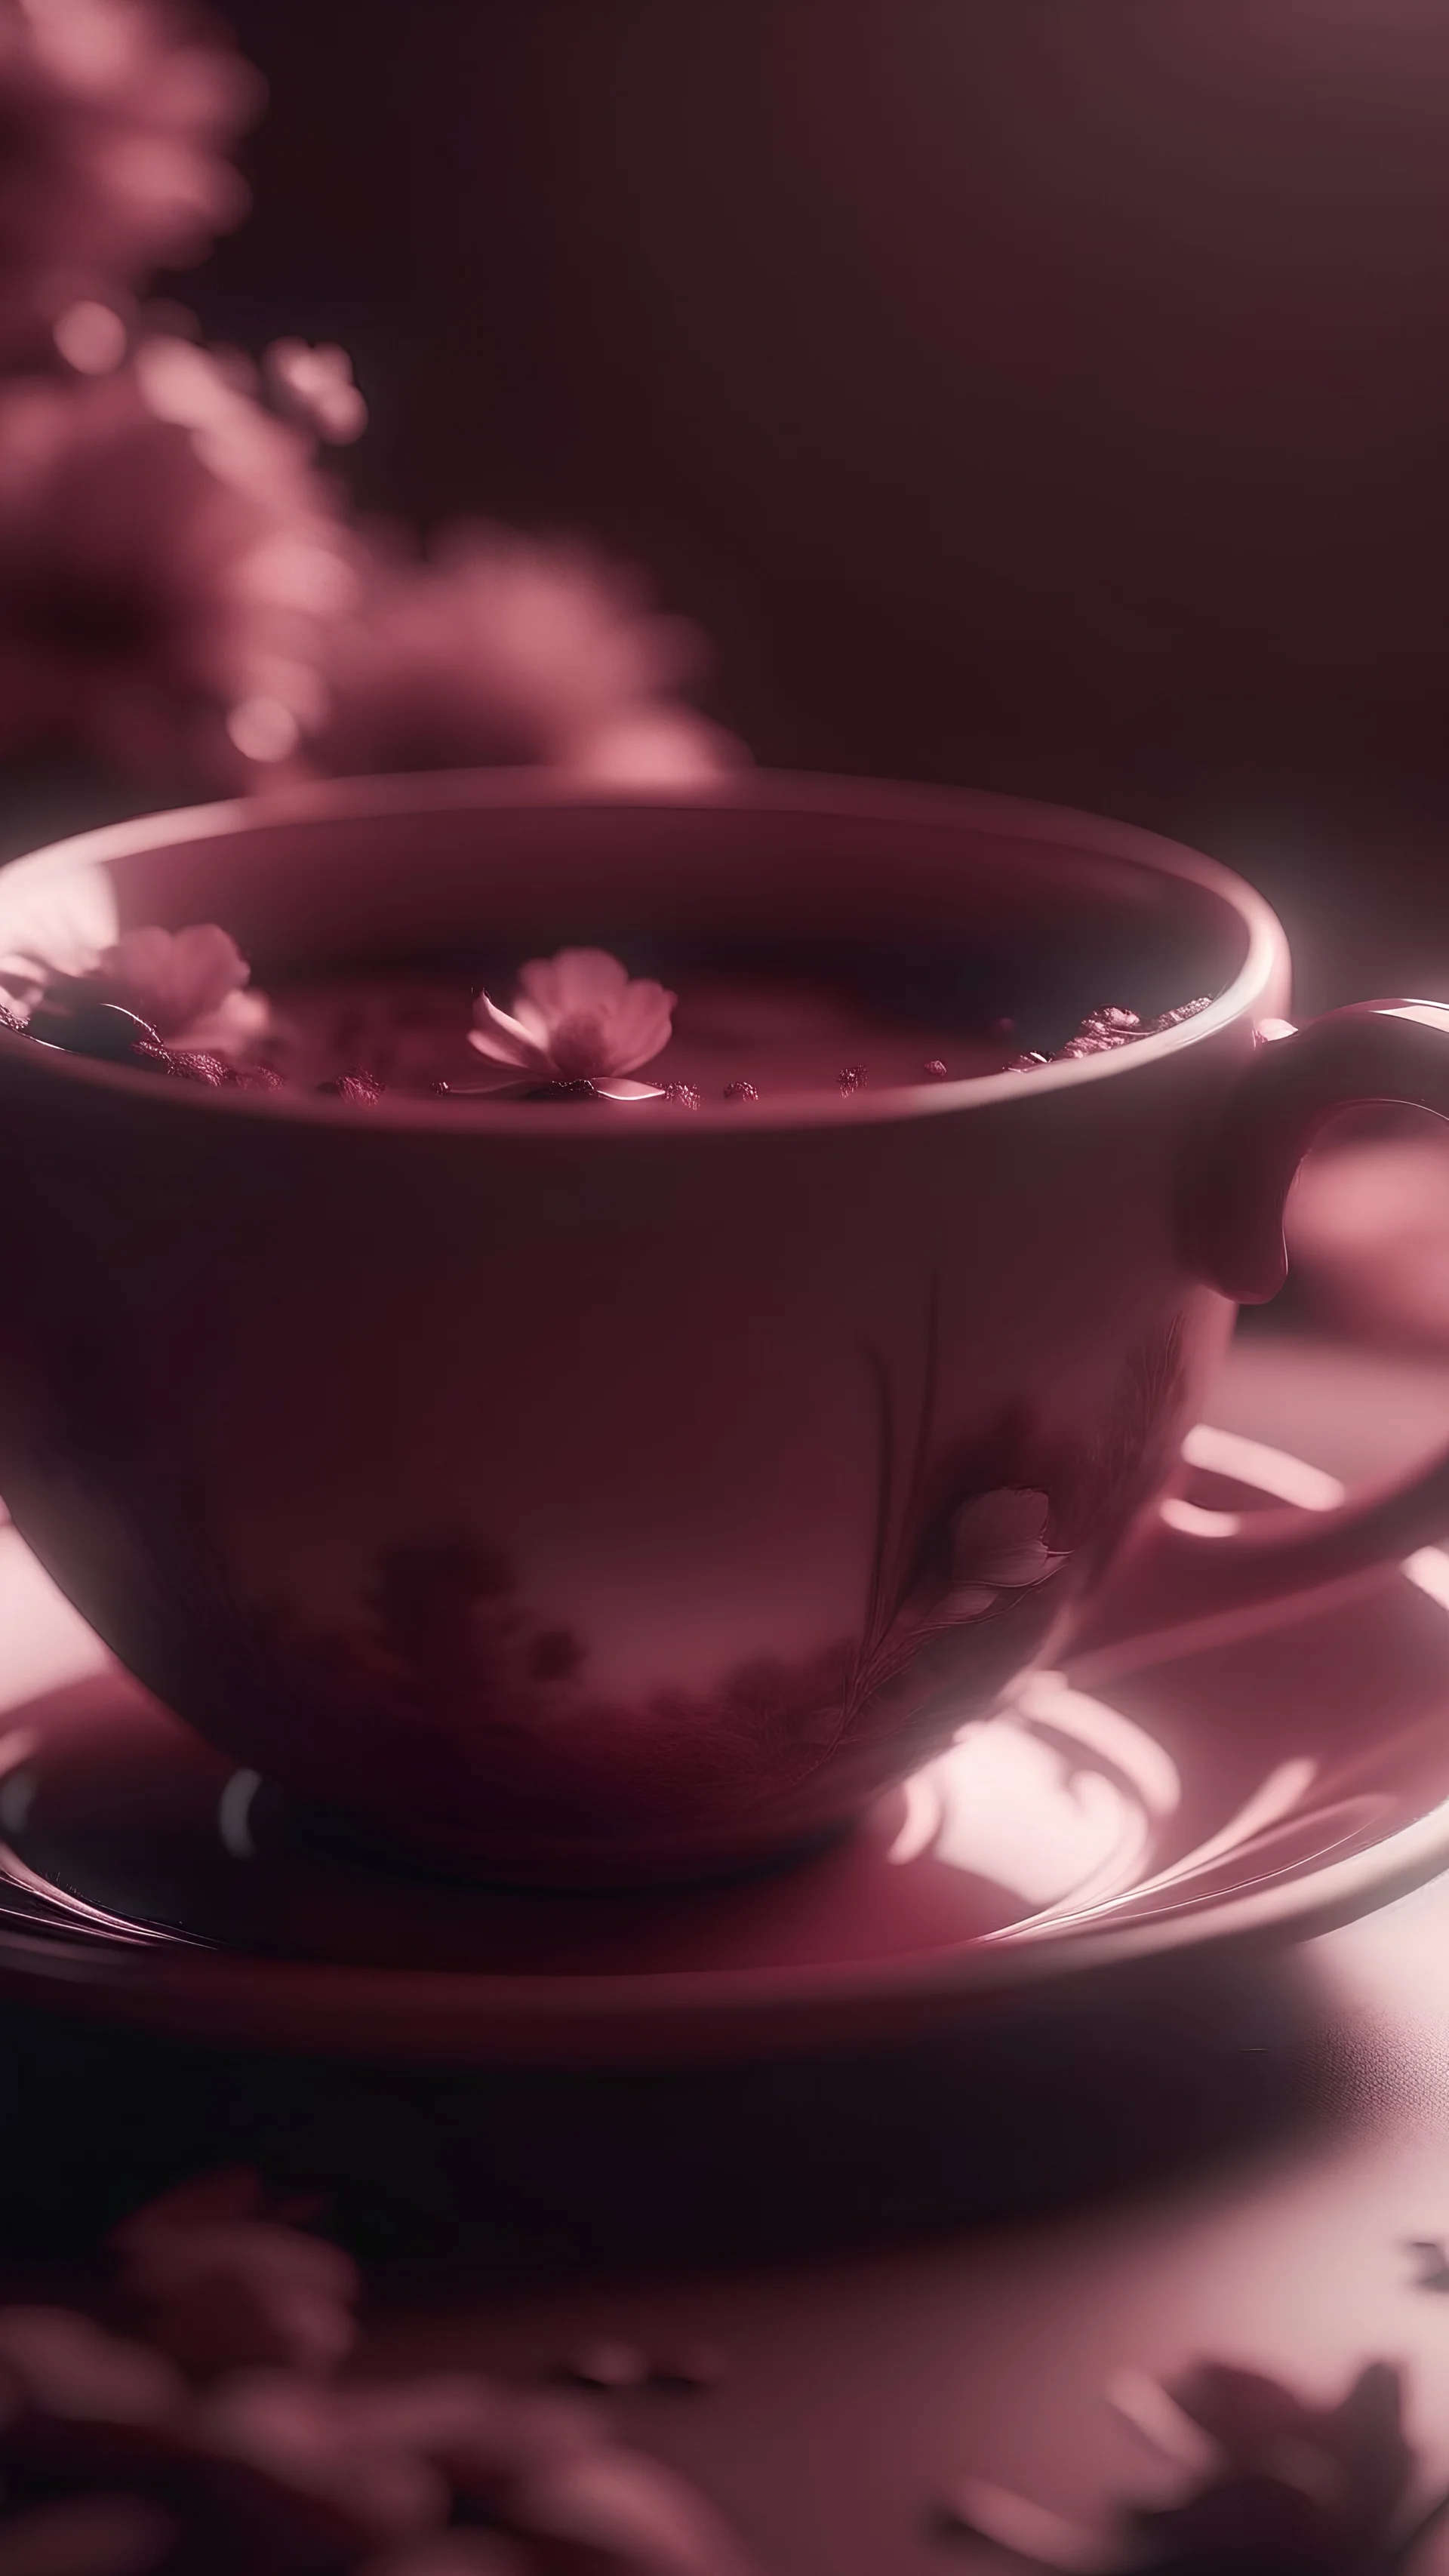 a cup of tea with a cup of flowers, in the style of light magenta and brown, monochromatic masterpieces, 32k uhd, refined aesthetic sensibility, soft yet vibrant, caffenol developing, barbiecore —ar 10:13 —s 750